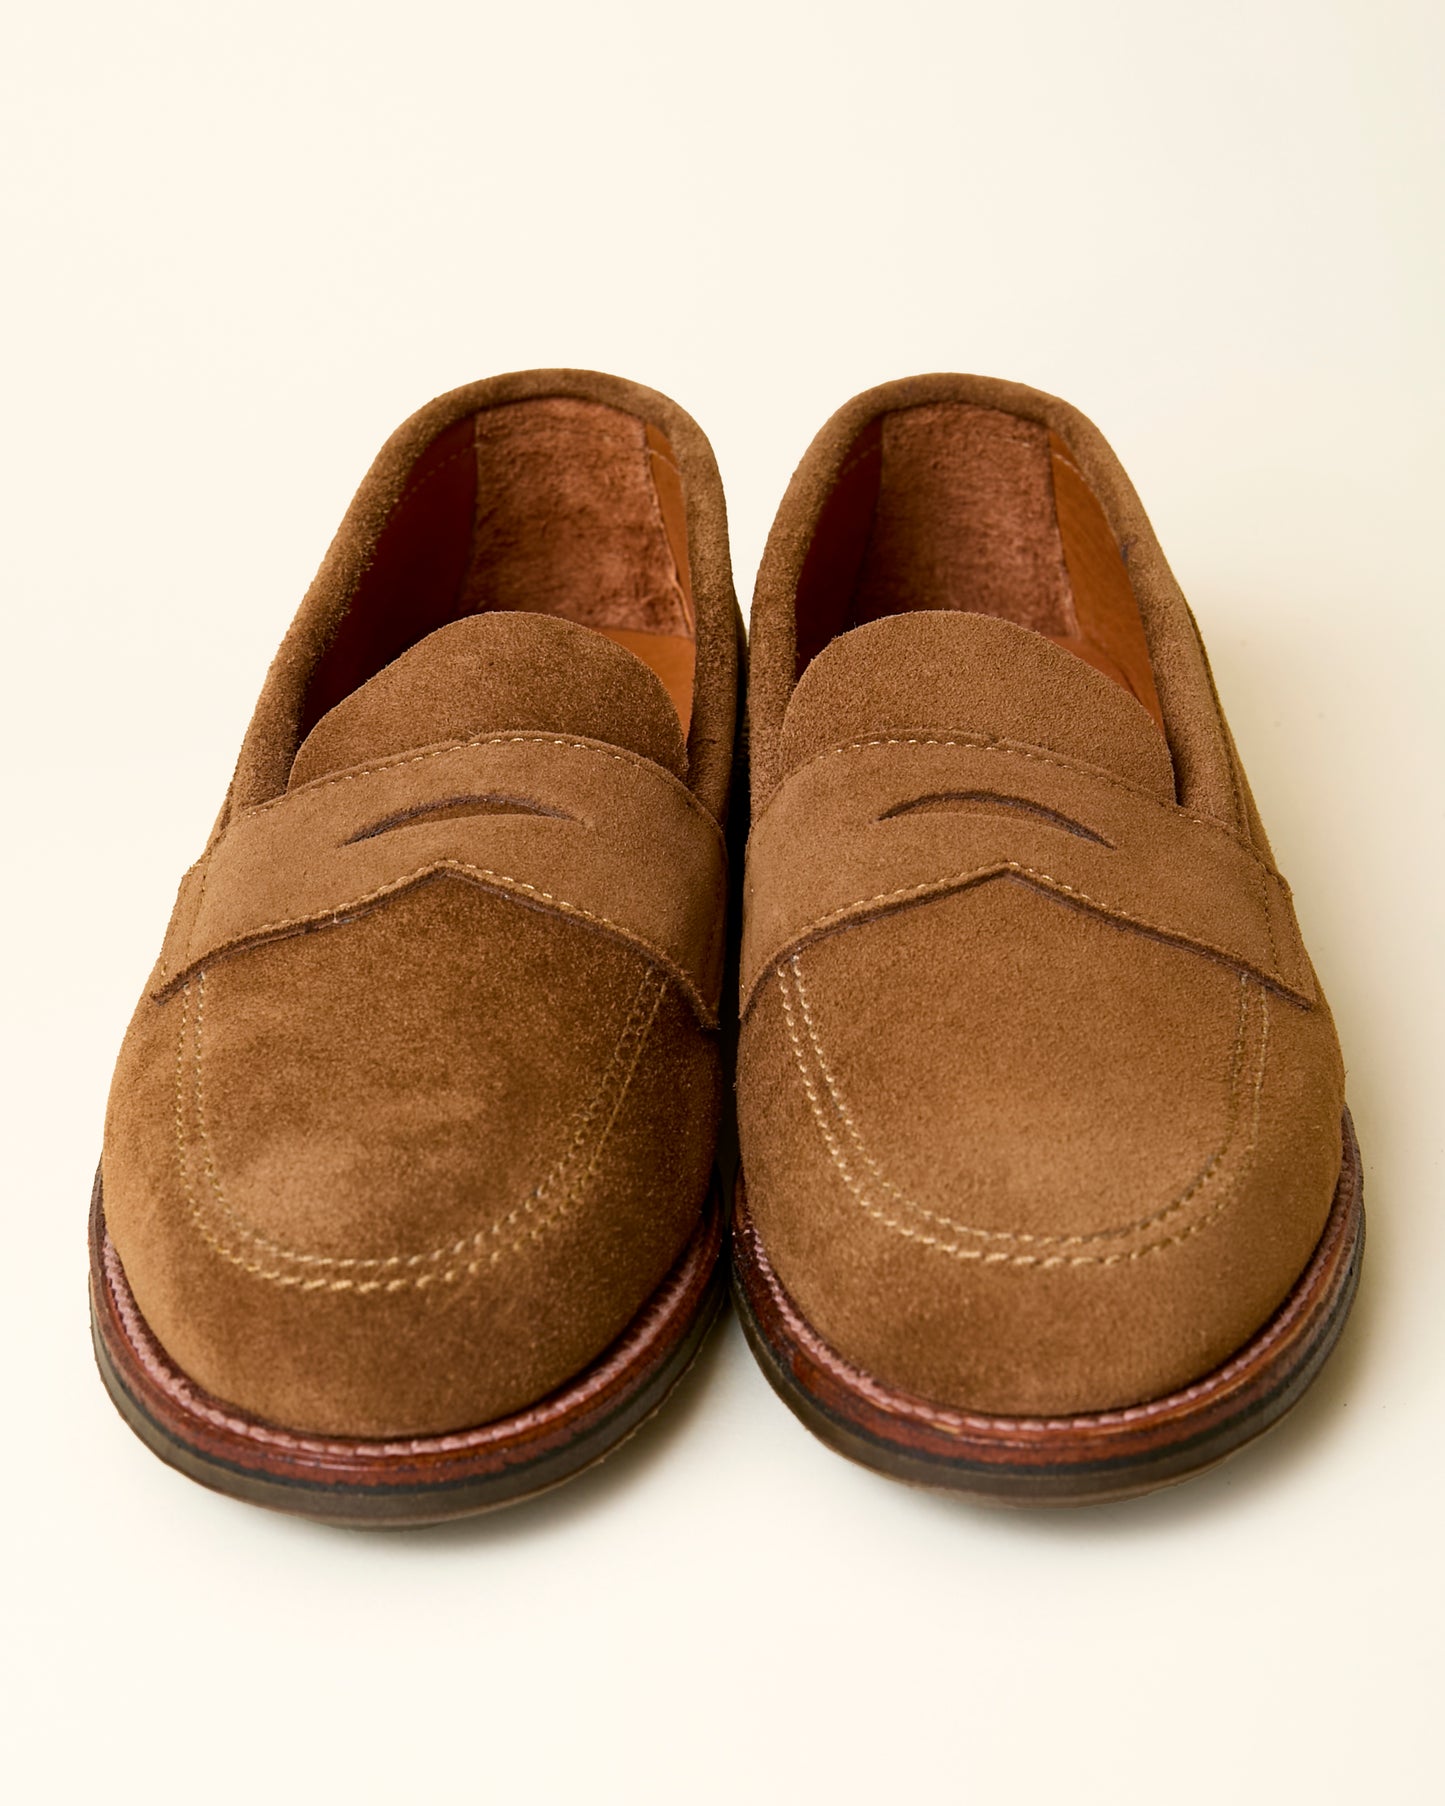 6221L Unlined Penny Loafer in Snuff Suede, Van Last